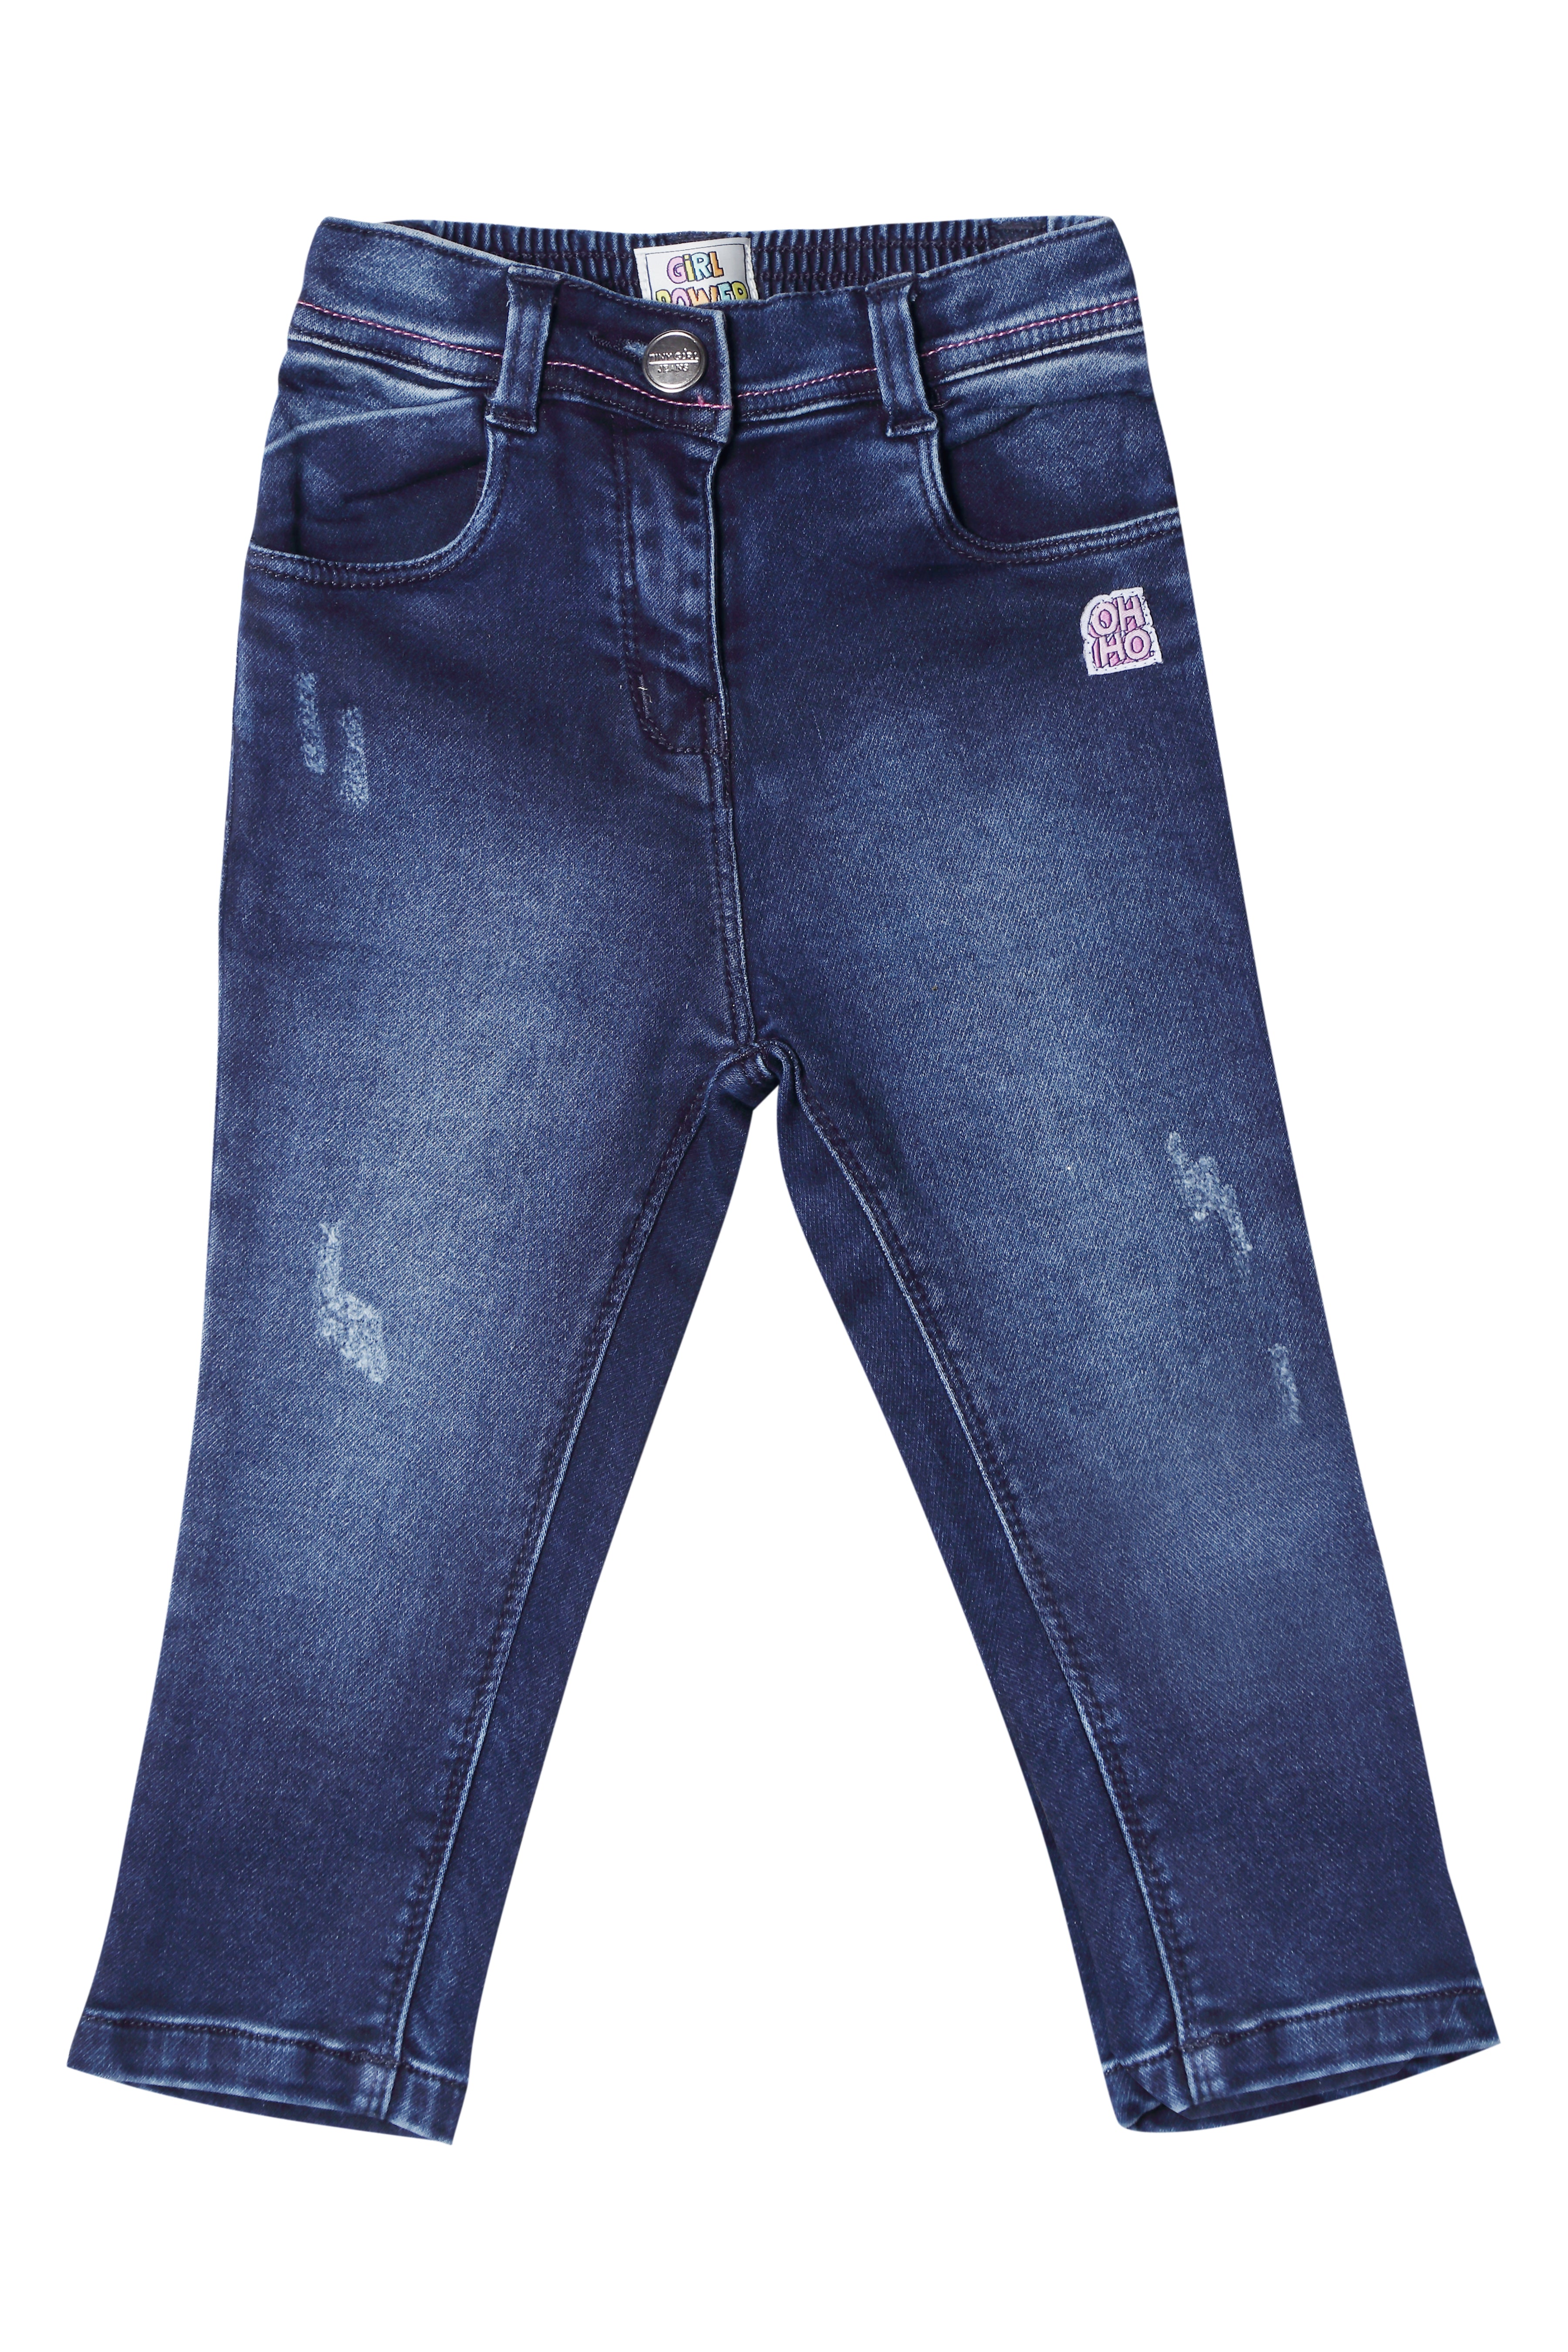 Buy AND Women ankle-length Blue straight fit Jeans online